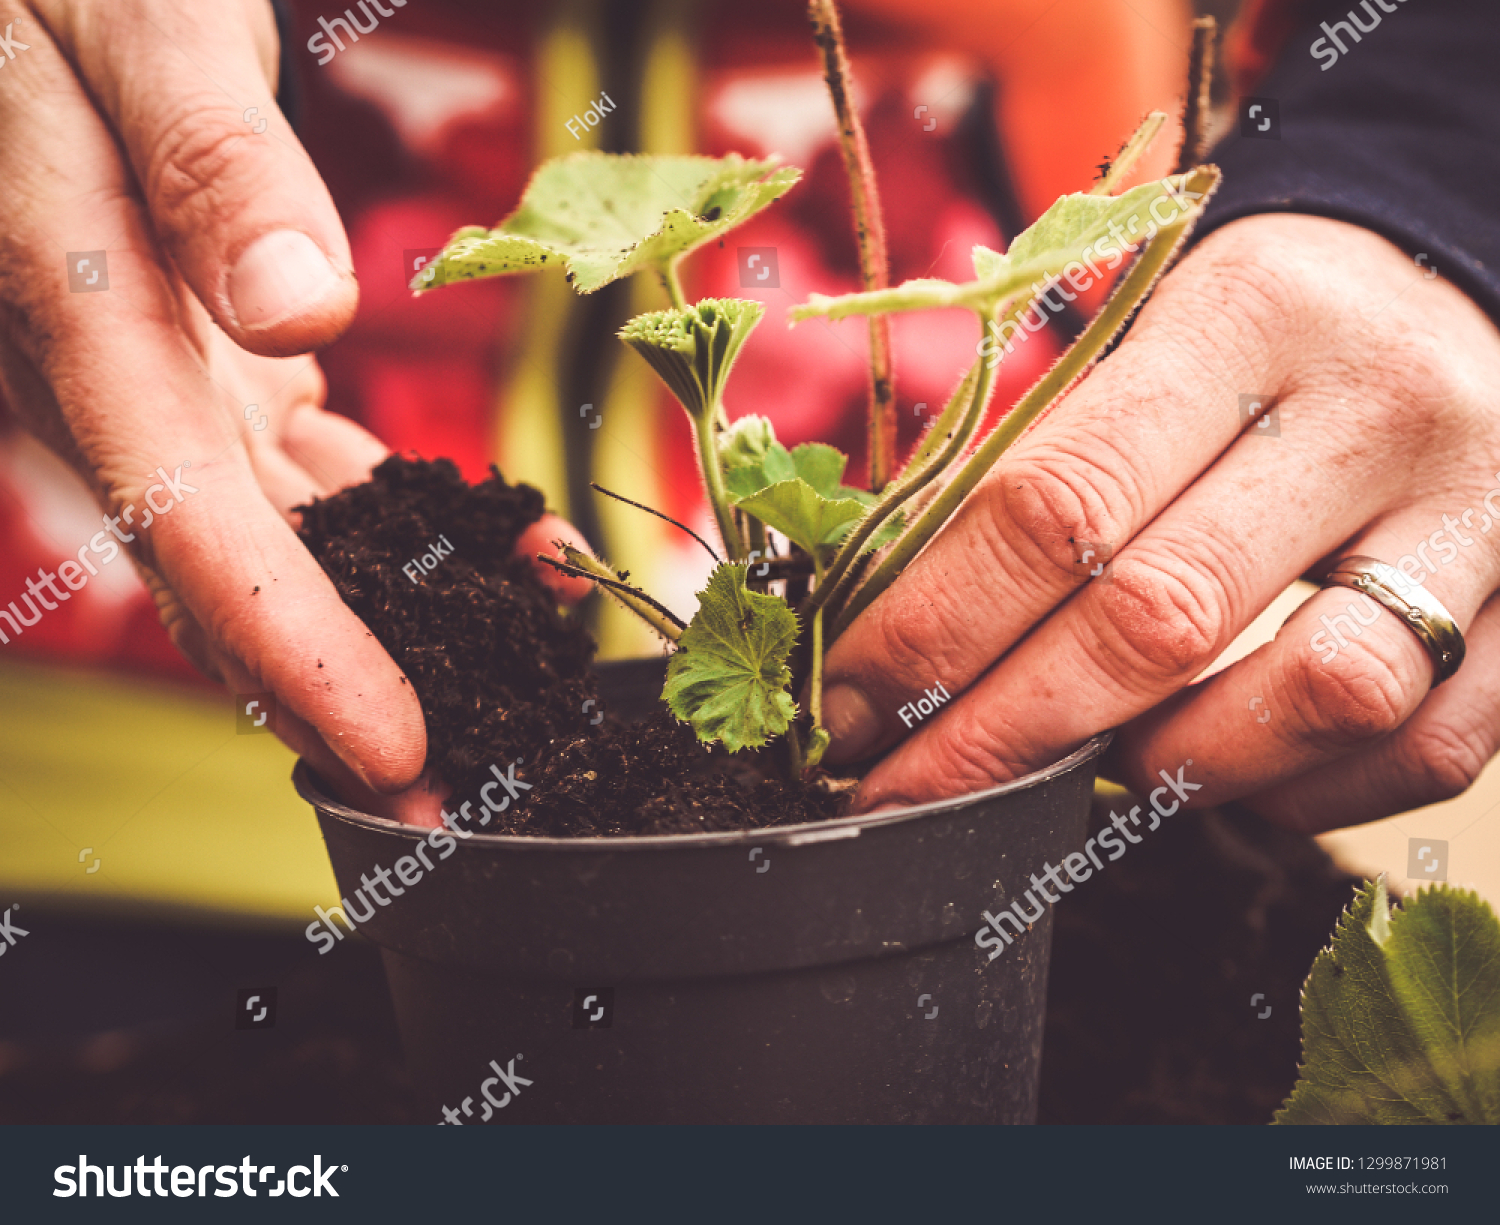 two hands planting a plant -  image shows how to propagate perennials - planting Alchemilla or ladys mantle using dirt or soil #1299871981